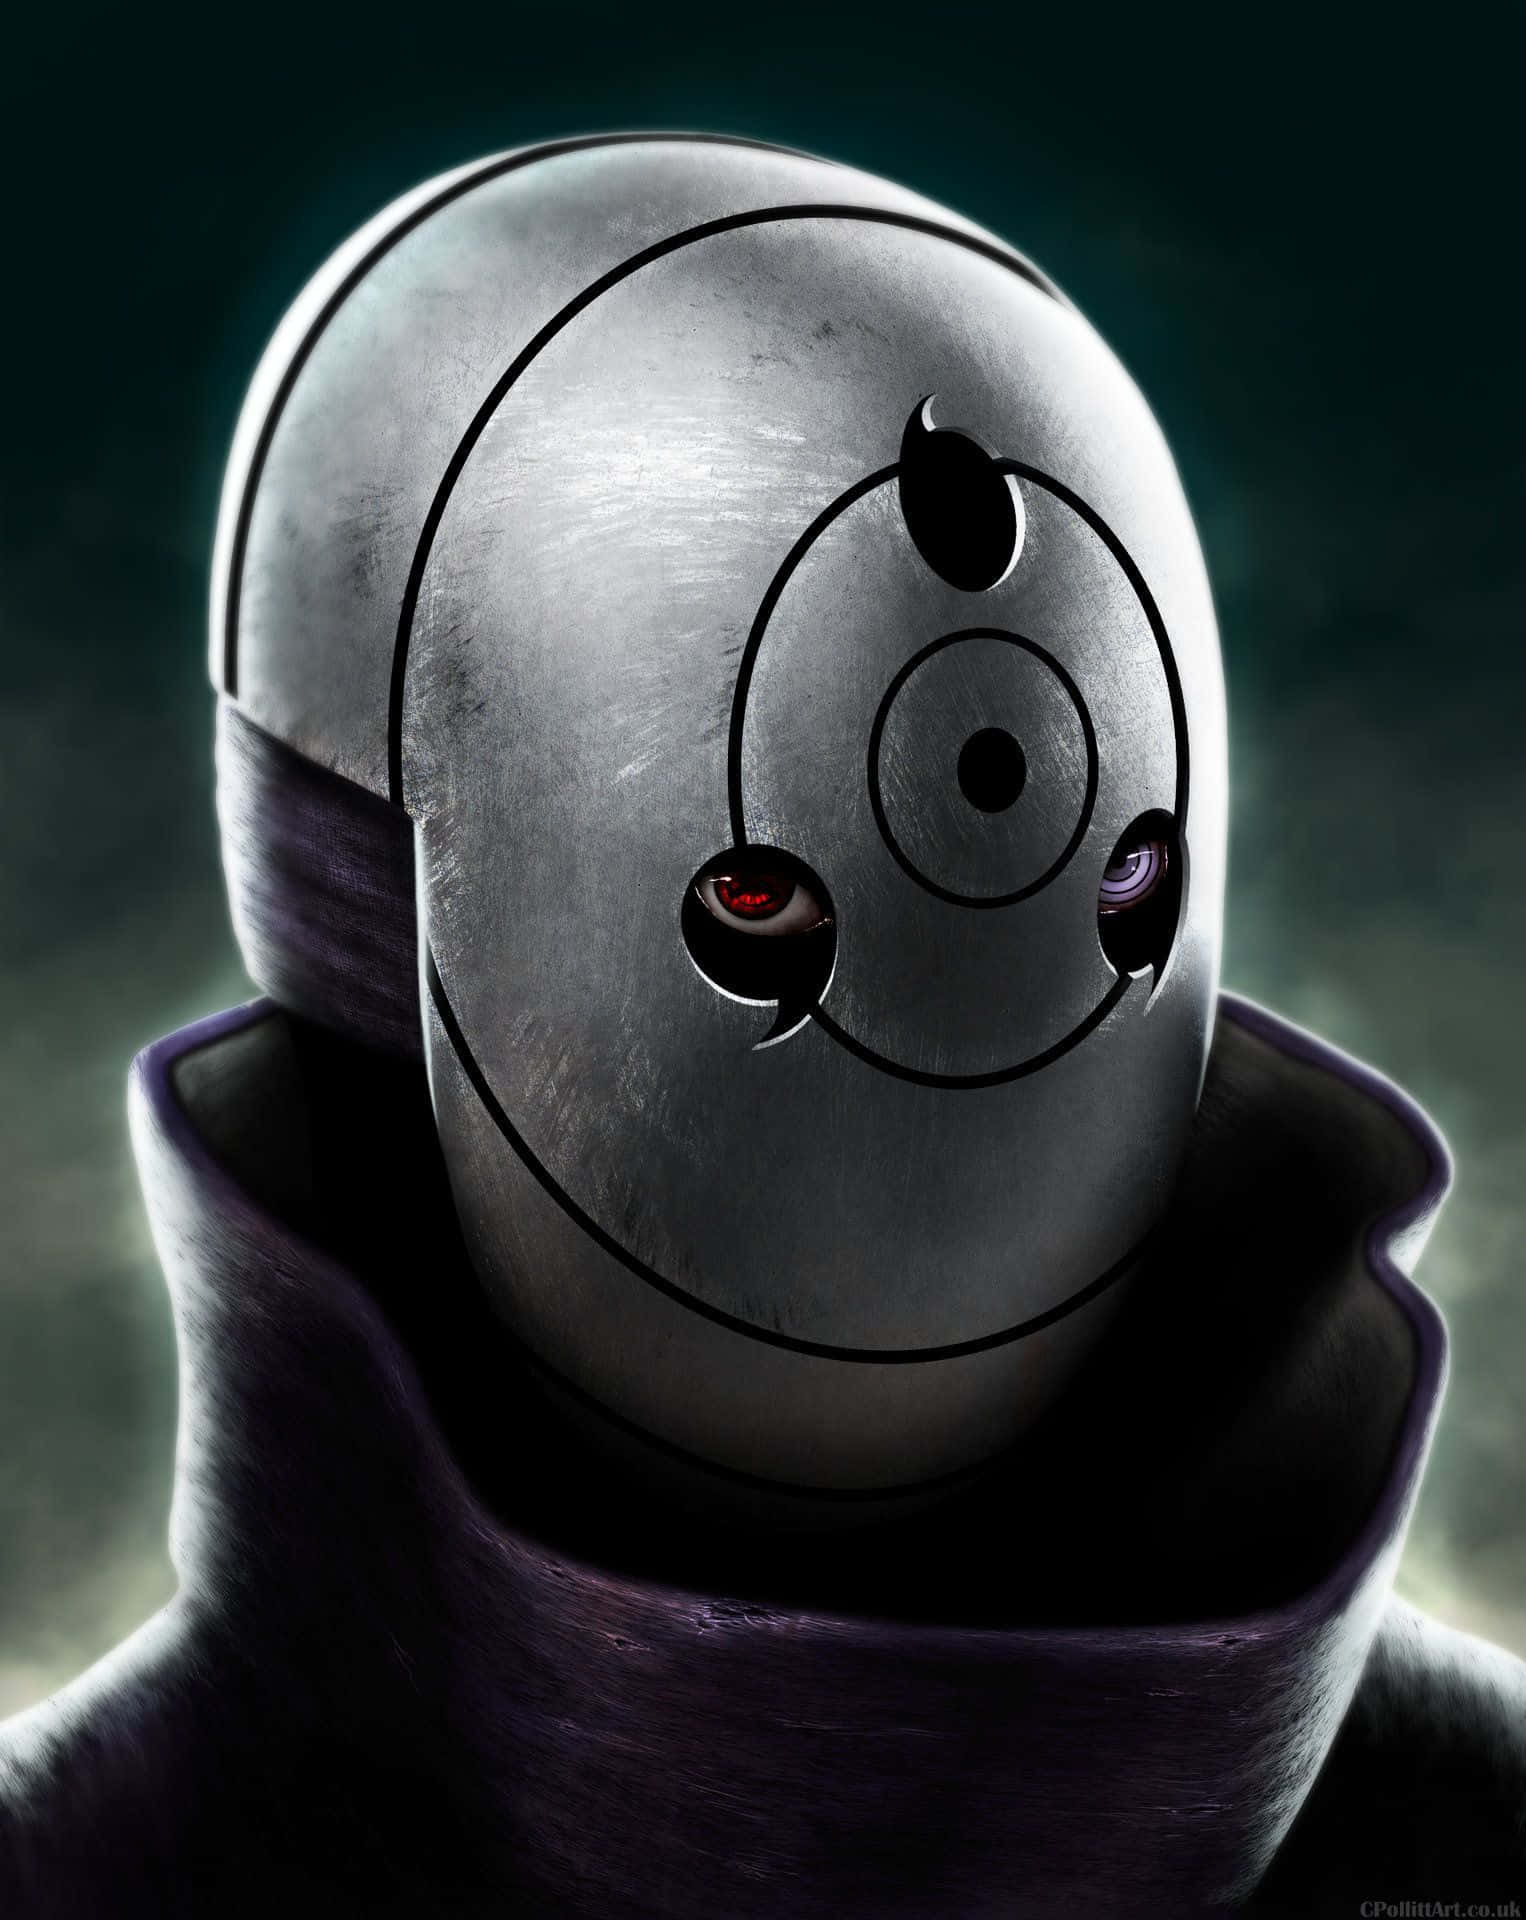 A Black And Silver Robot With A Red Eye Wallpaper